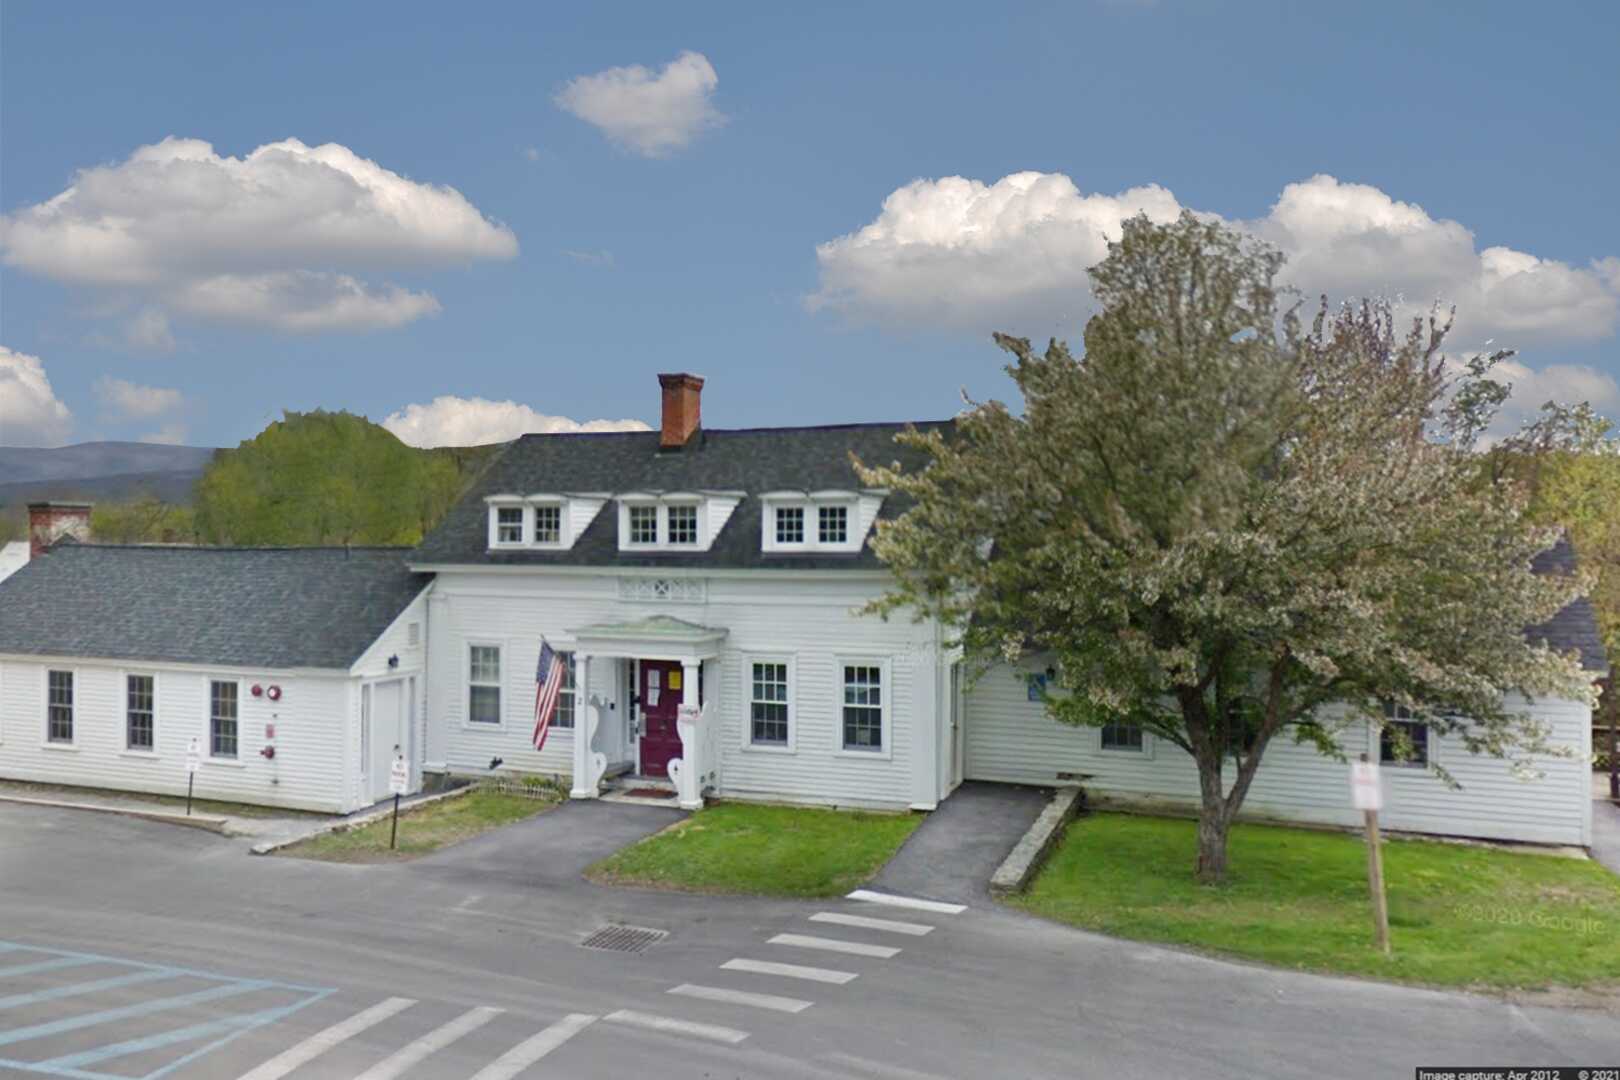 An old white colonial house that has been converted into a business location. There is a beautiful blue sky with clouds and a tree out front.